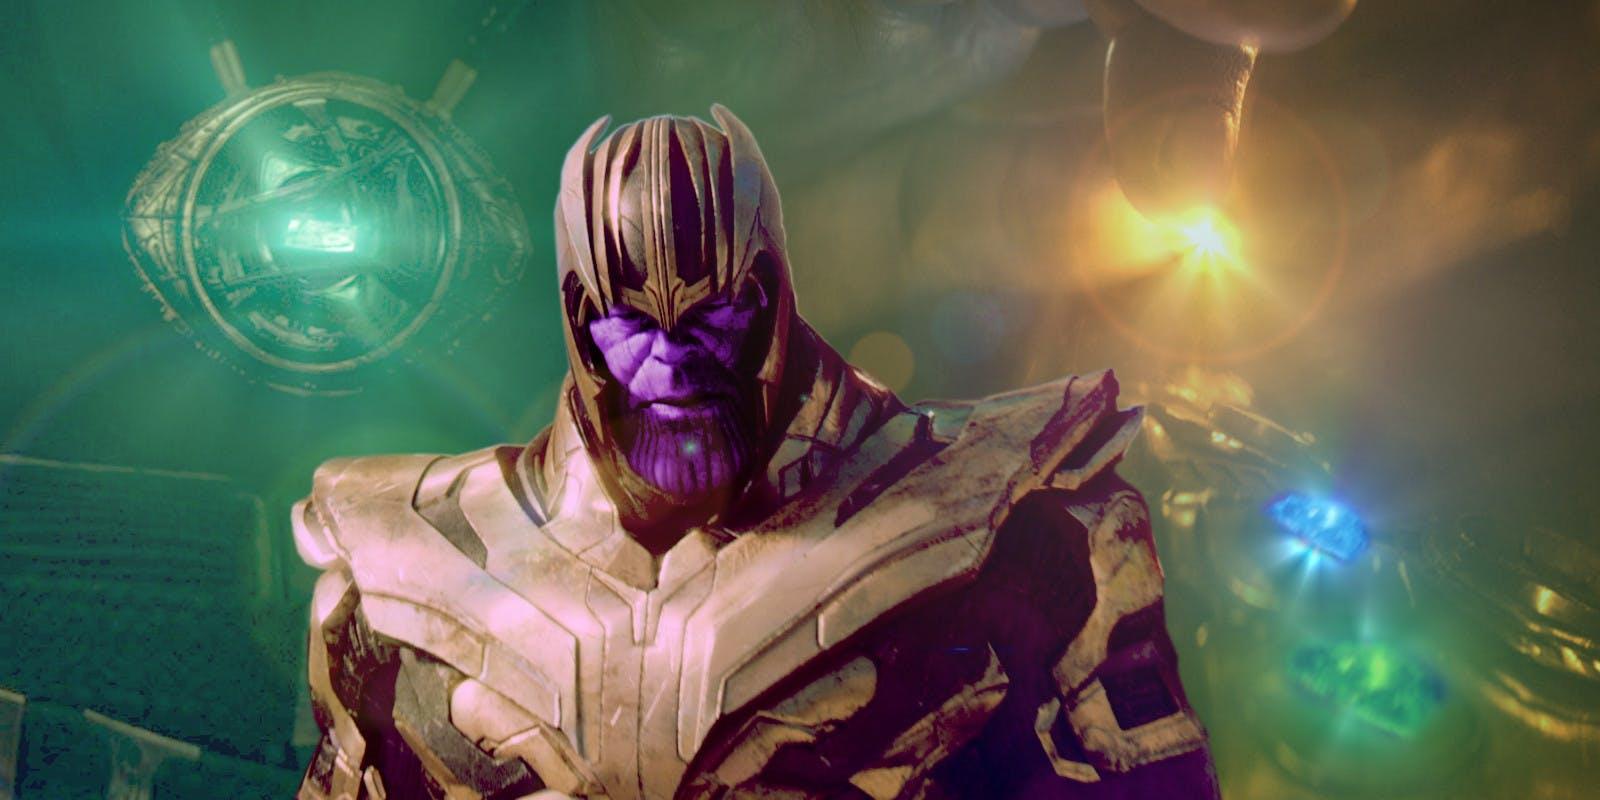 Greatest Thanos Quotes From Avengers: Infinity War That Fans Will